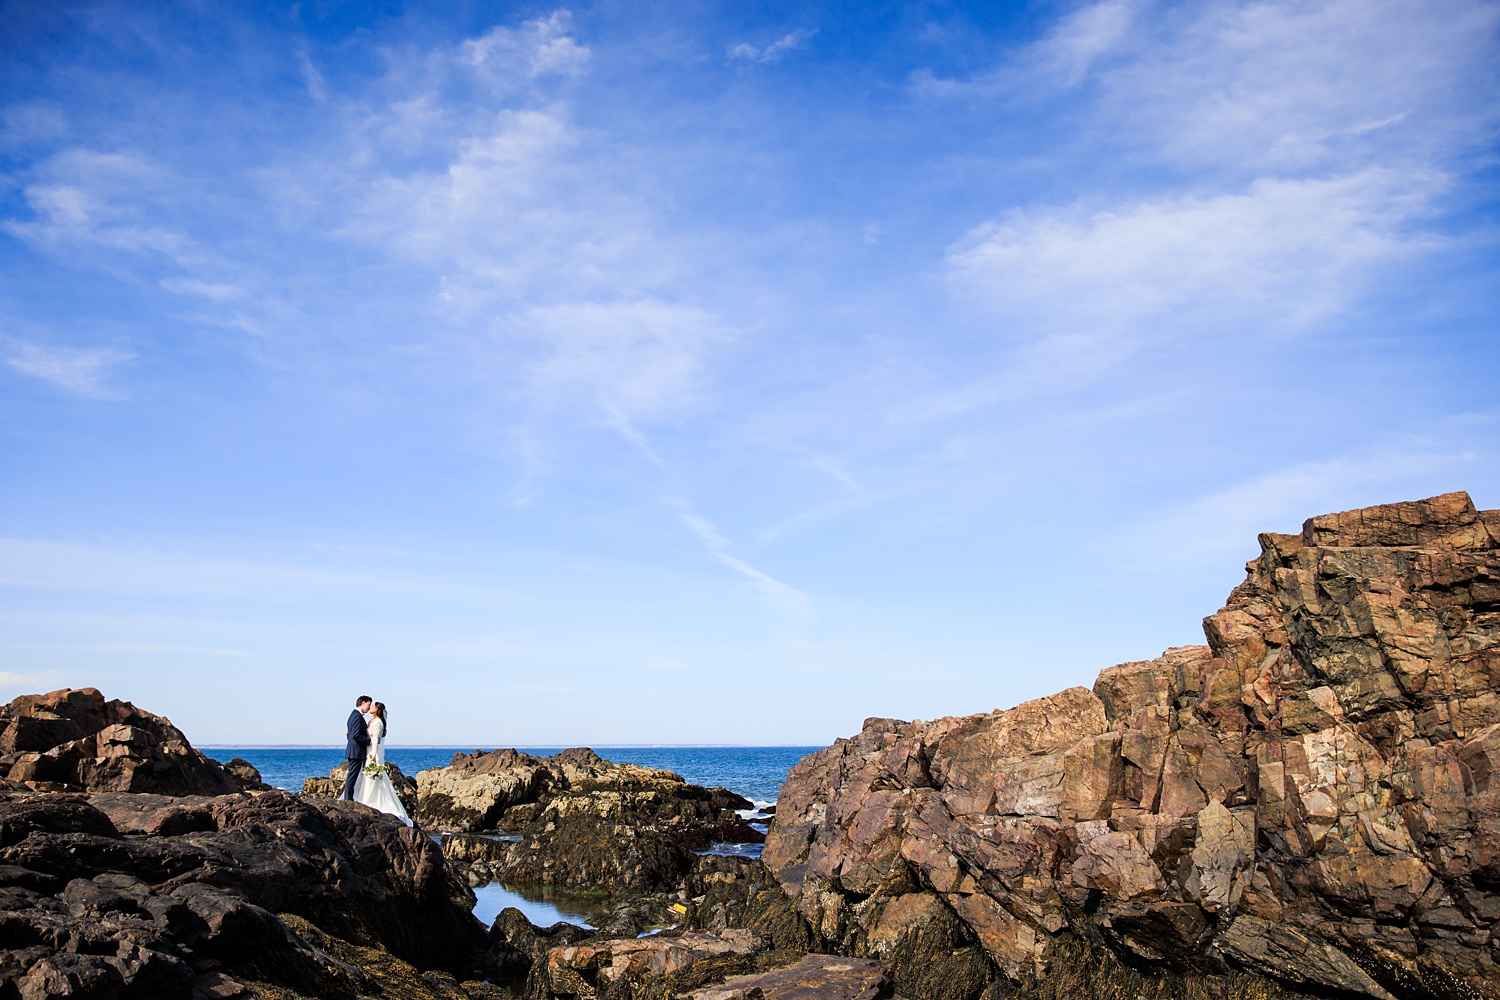 The couple and the rocks of coastal Maine on a bright sunny Maine day